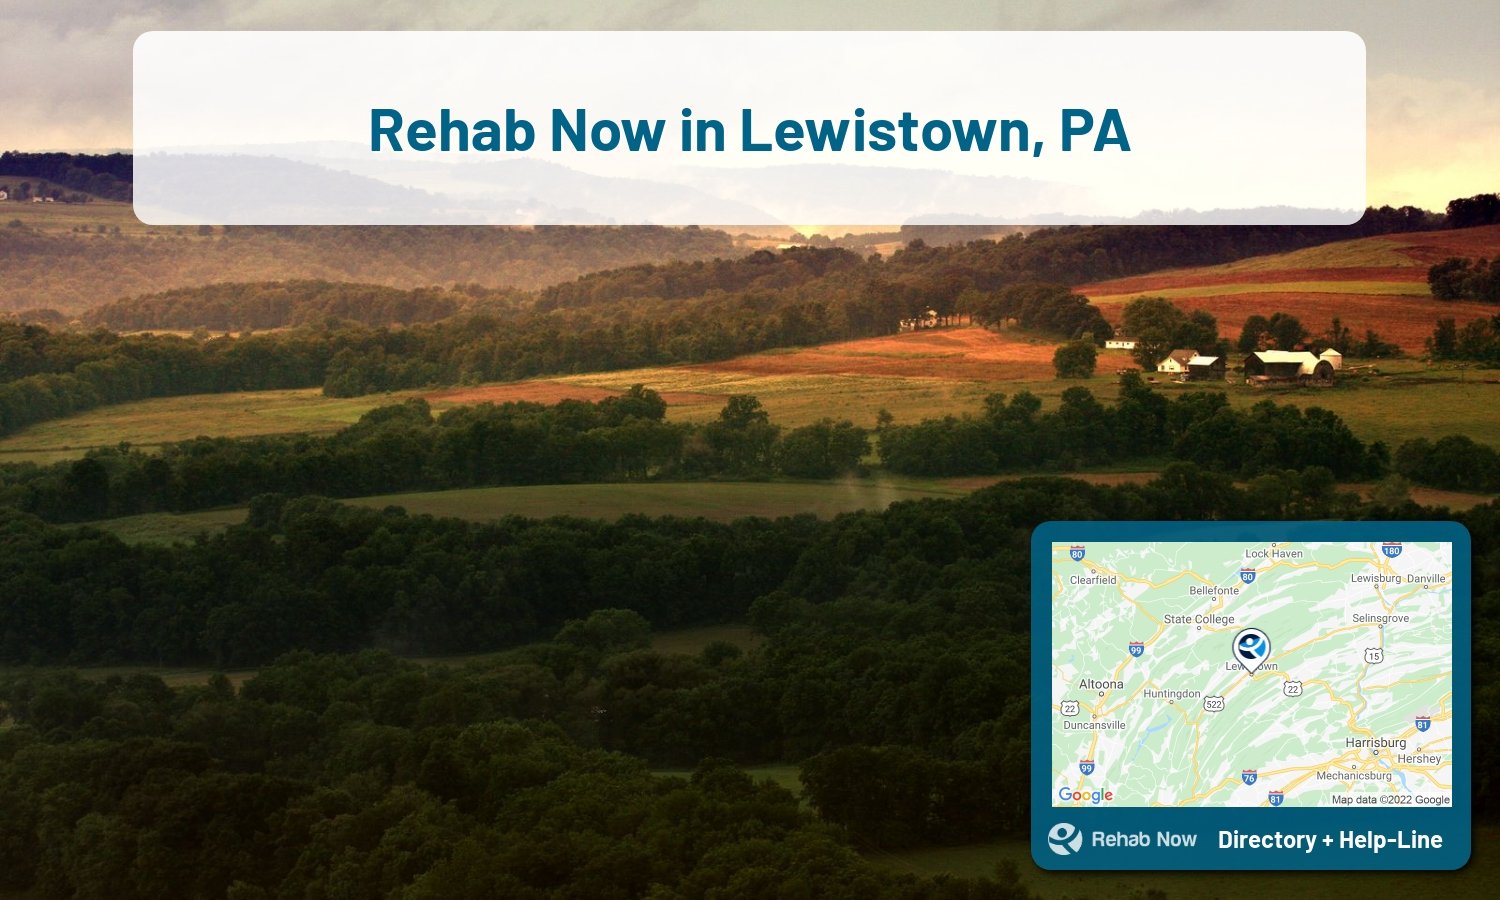 View options, availability, treatment methods, and more, for drug rehab and alcohol treatment in Lewistown, Pennsylvania